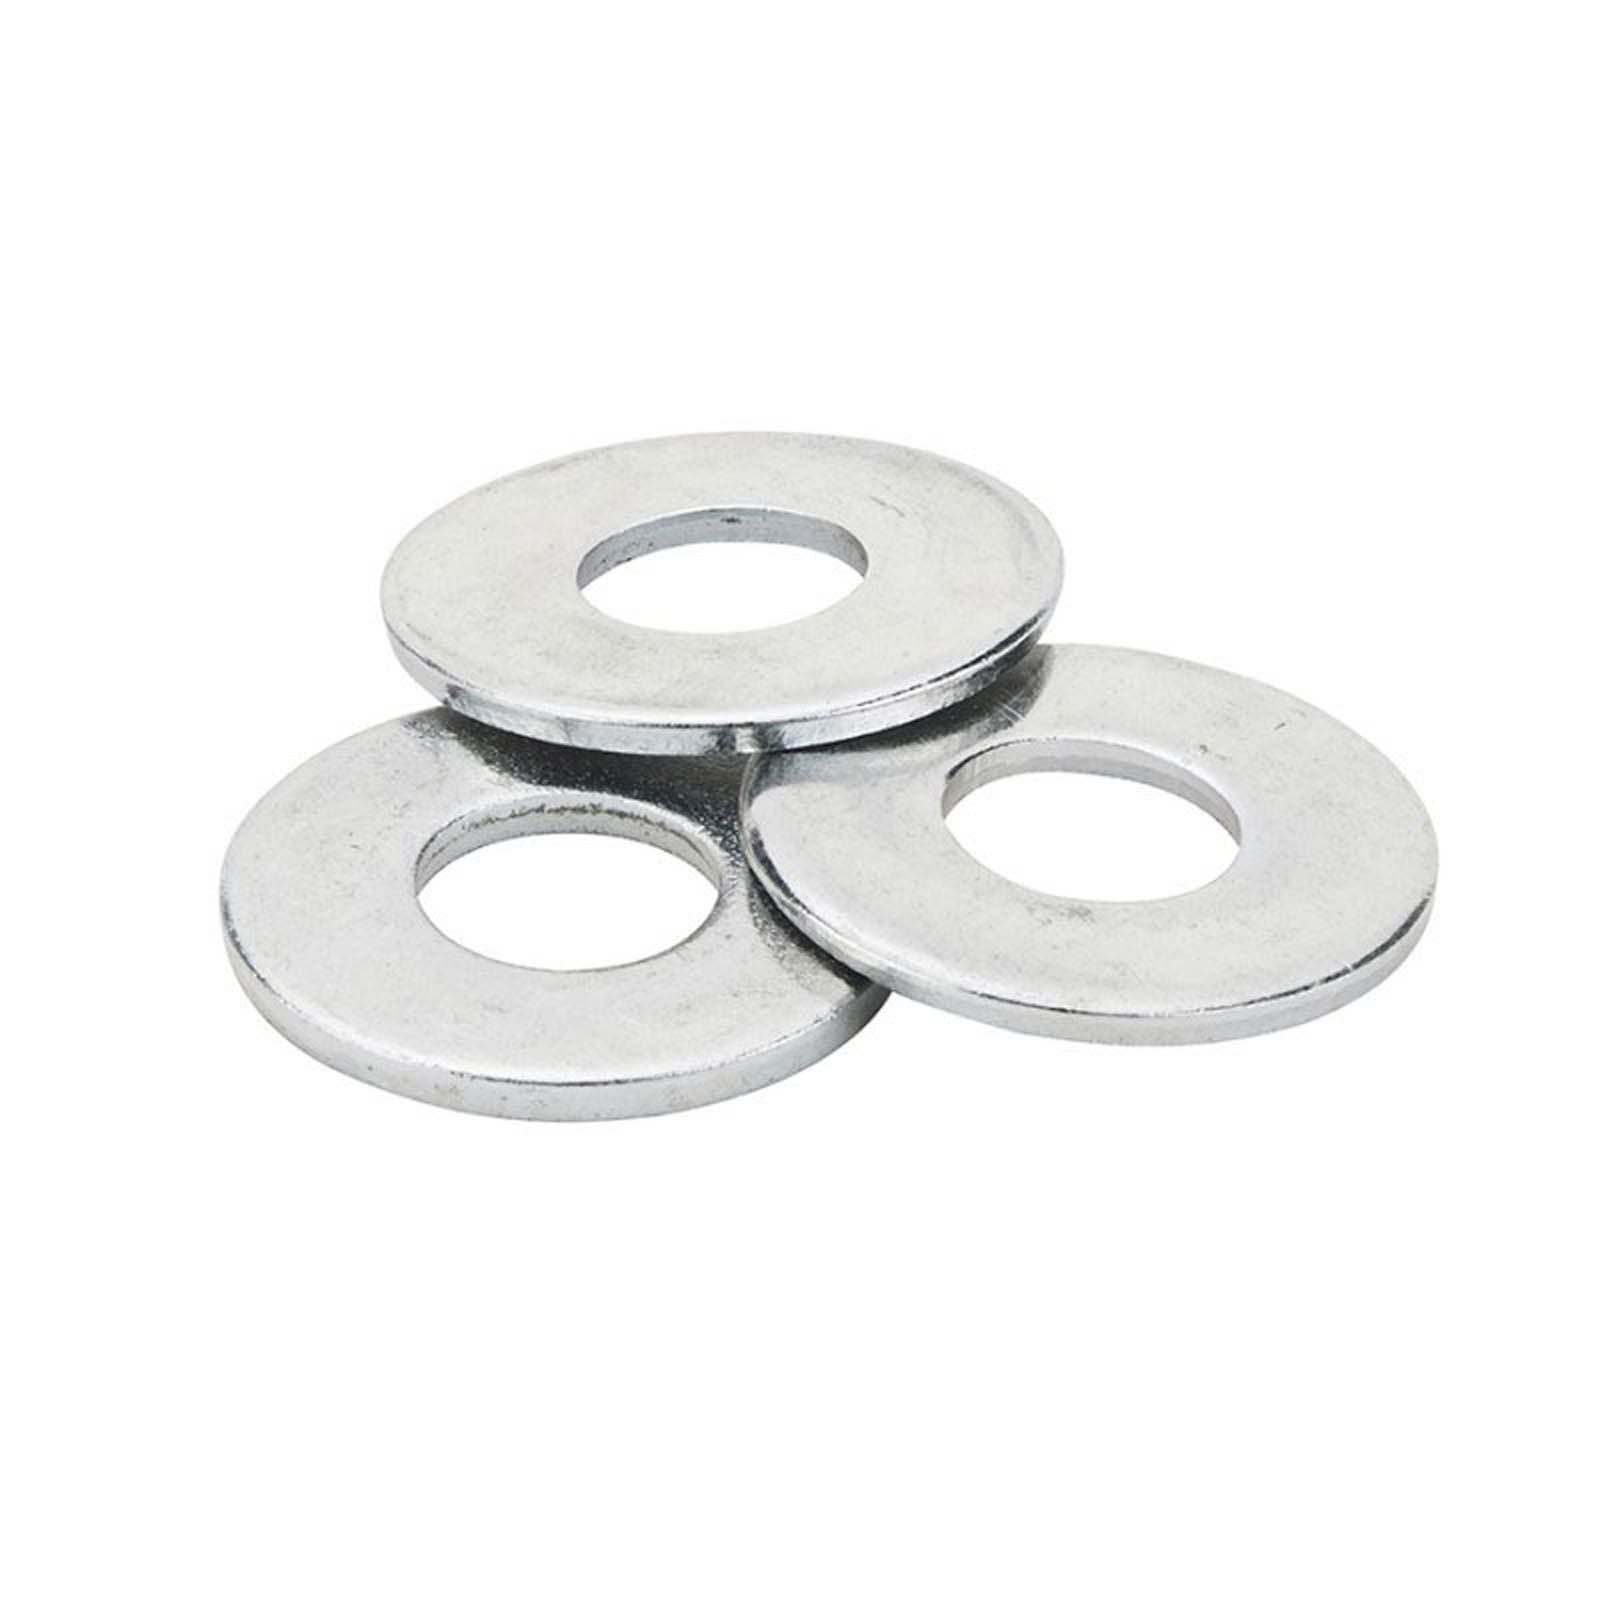 New WHITES Washer Flat Zinc Plated - 6mm (50 Pack) #HWW6